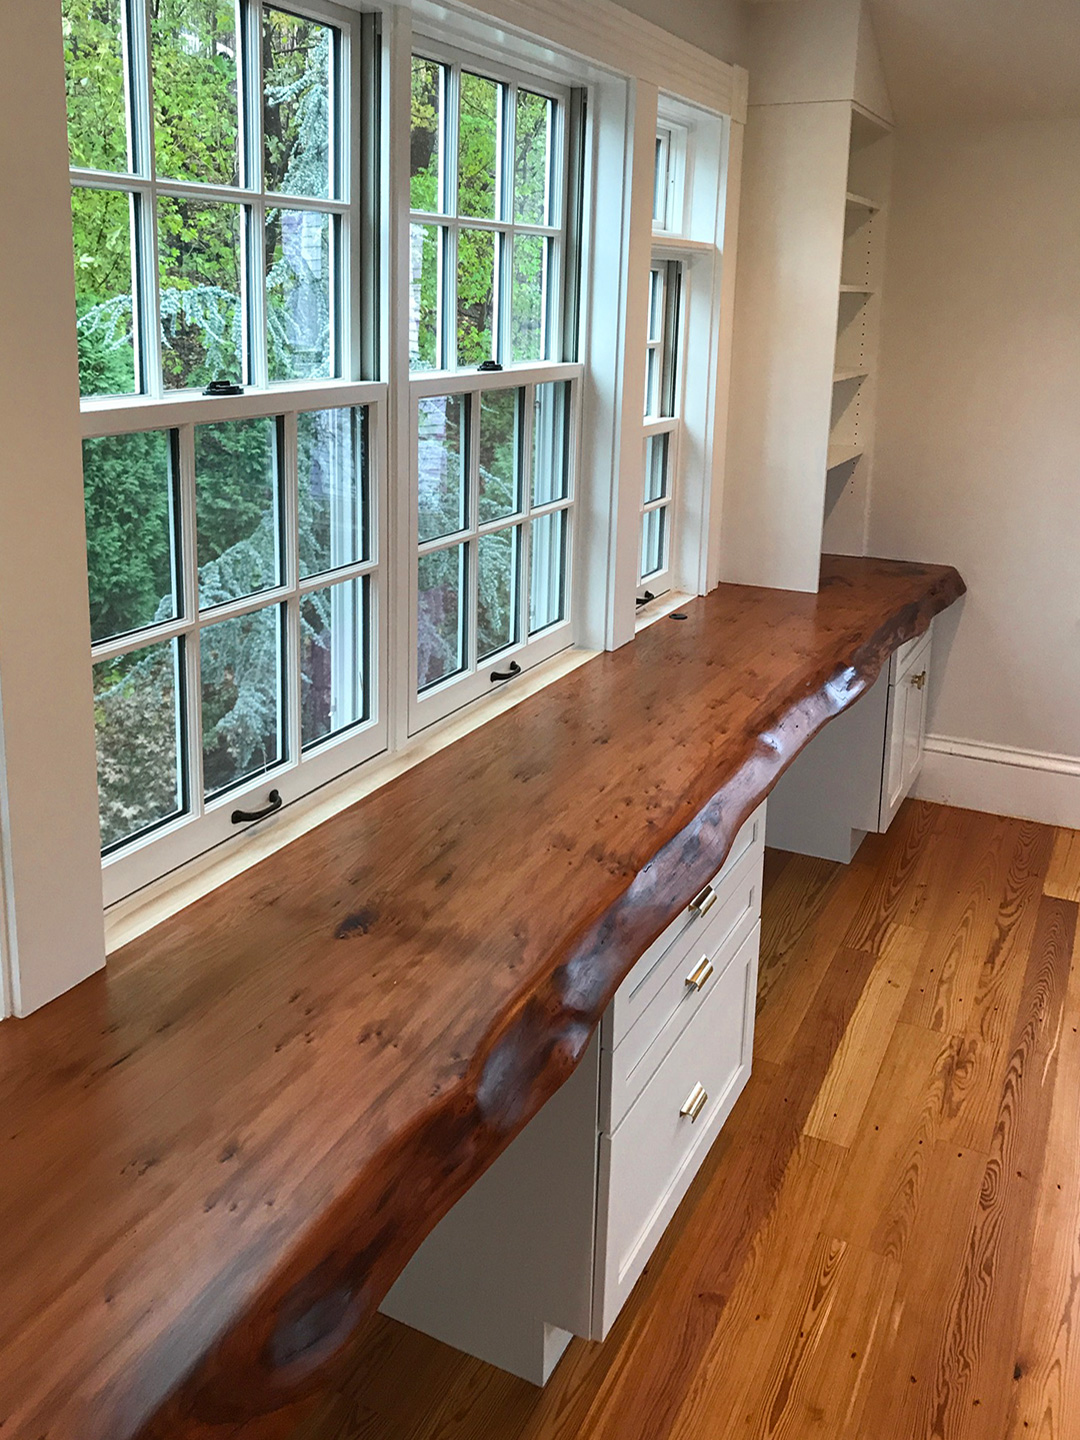 Salvaged Redwood Slab Desk And Reclaimed Heart Pine Flooring In Home Office